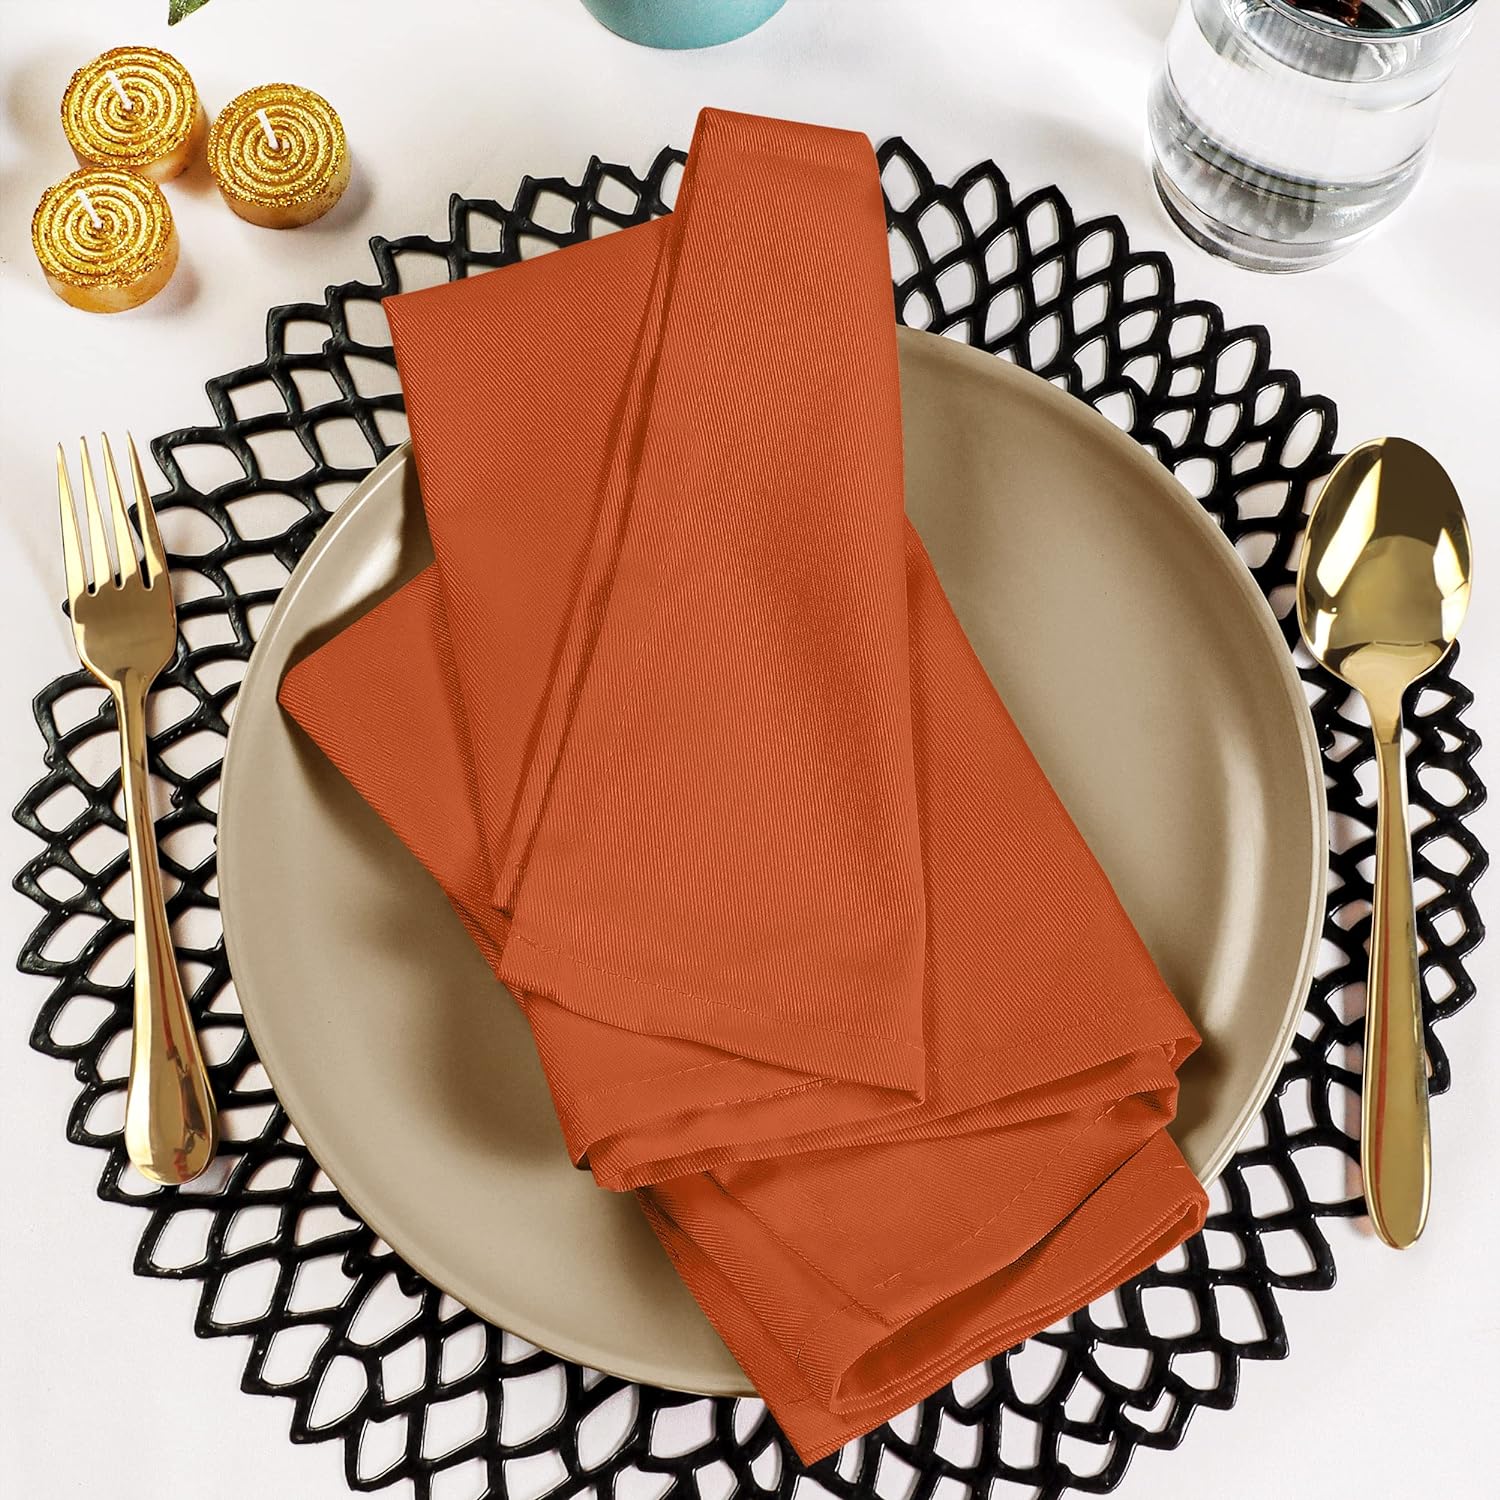  Utopia Home [24 Pack, Black] Cloth Napkins 17x17 Inches, 100%  Polyester Dinner Napkins with Hemmed Edges, Washable Napkins Ideal for  Parties, Weddings and Dinners : Home & Kitchen